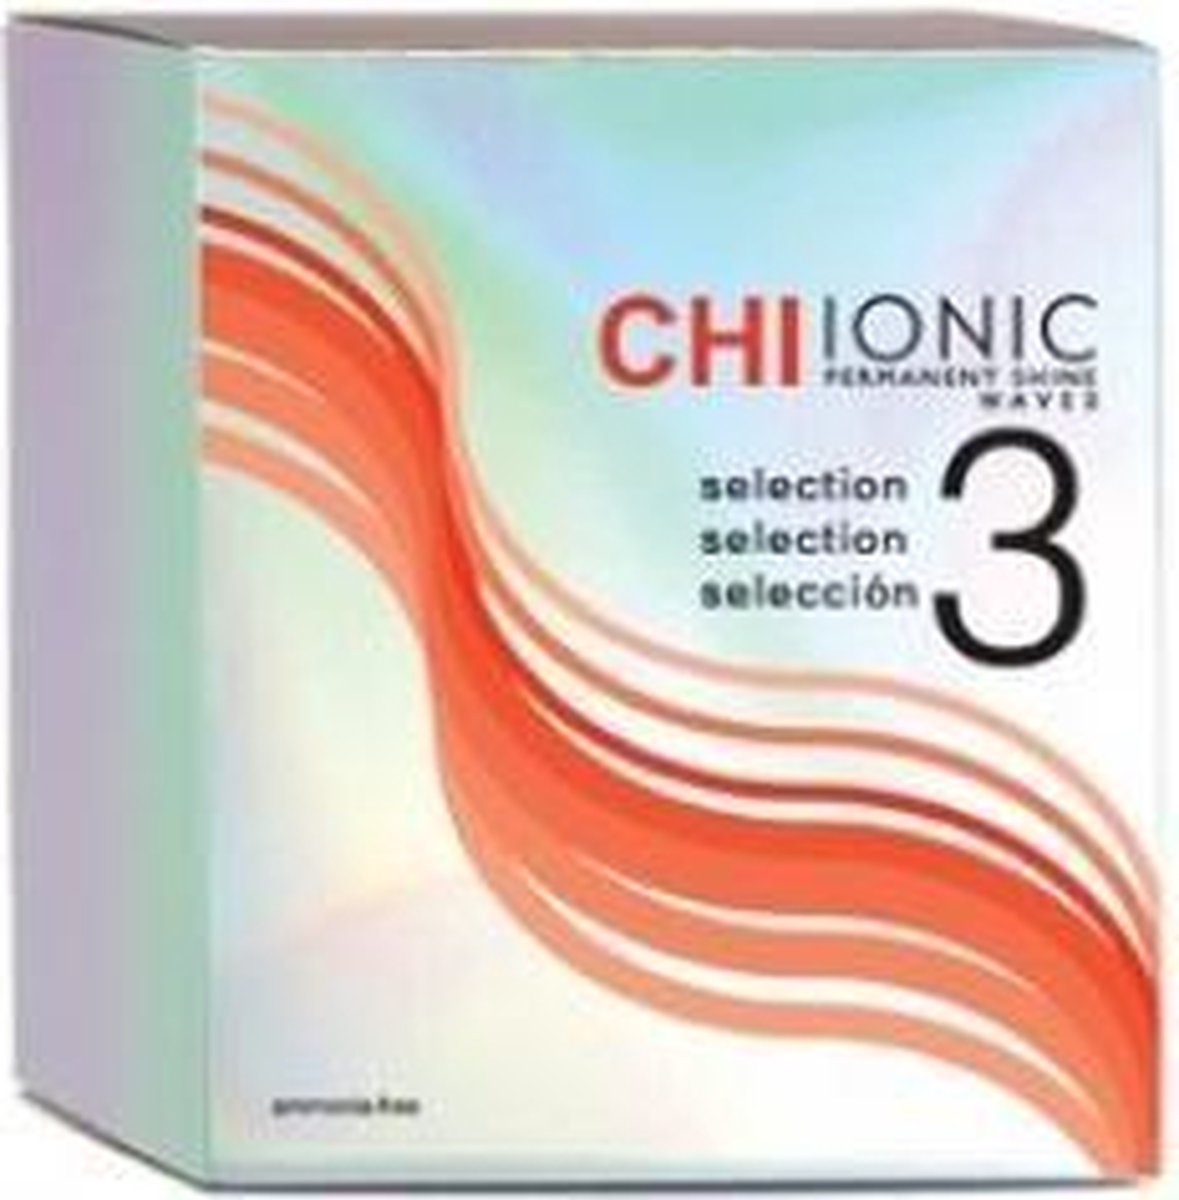 CHI Ionic Permanent Shine Waves - SELECTION 3